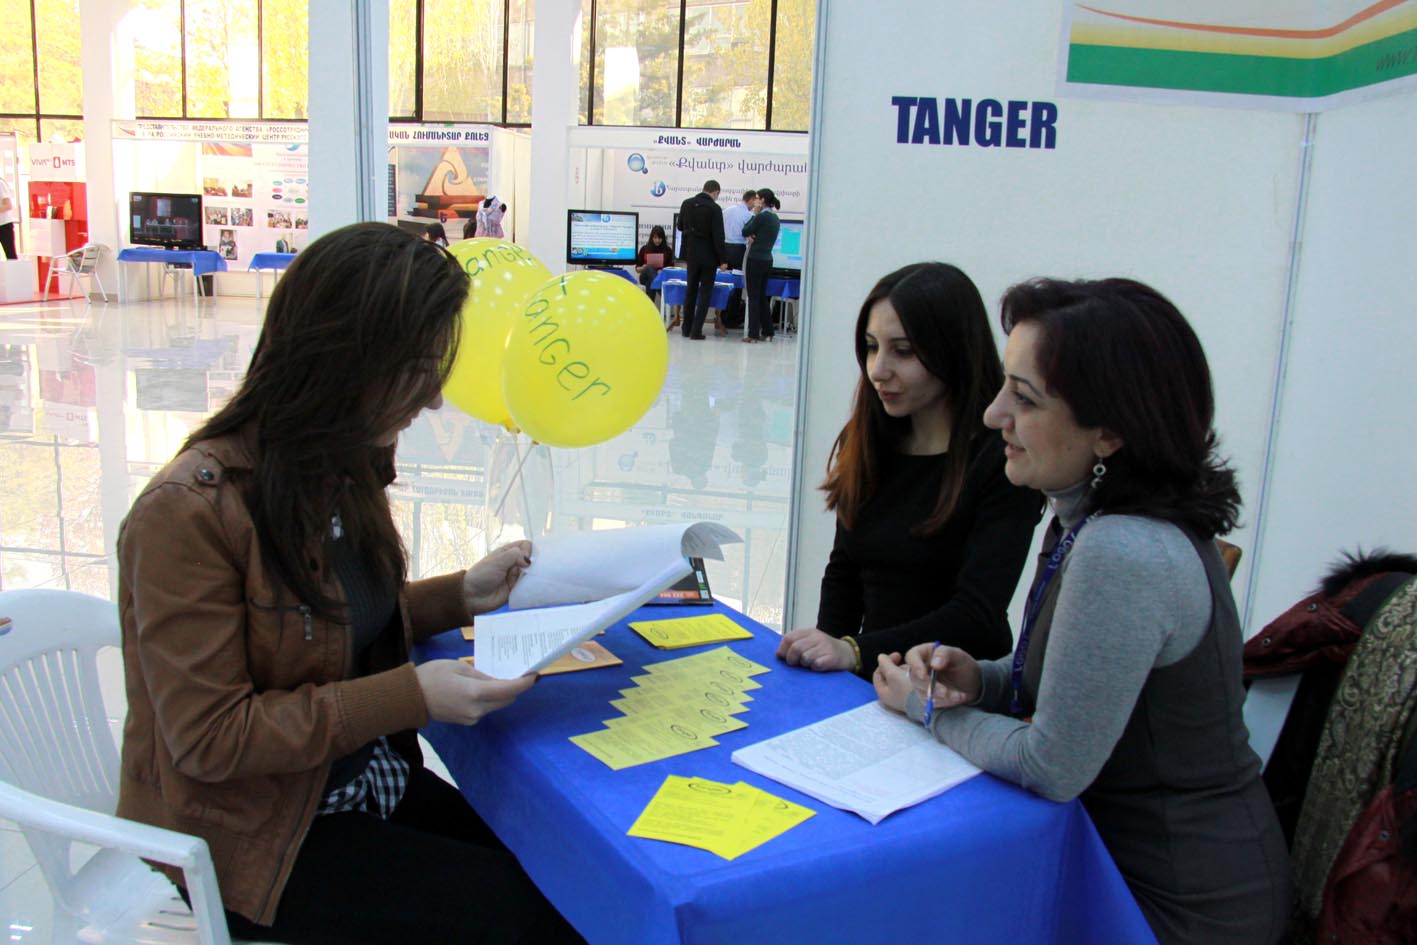 Education and Career EXPO 2012" thirteenth international specialized exhibition  